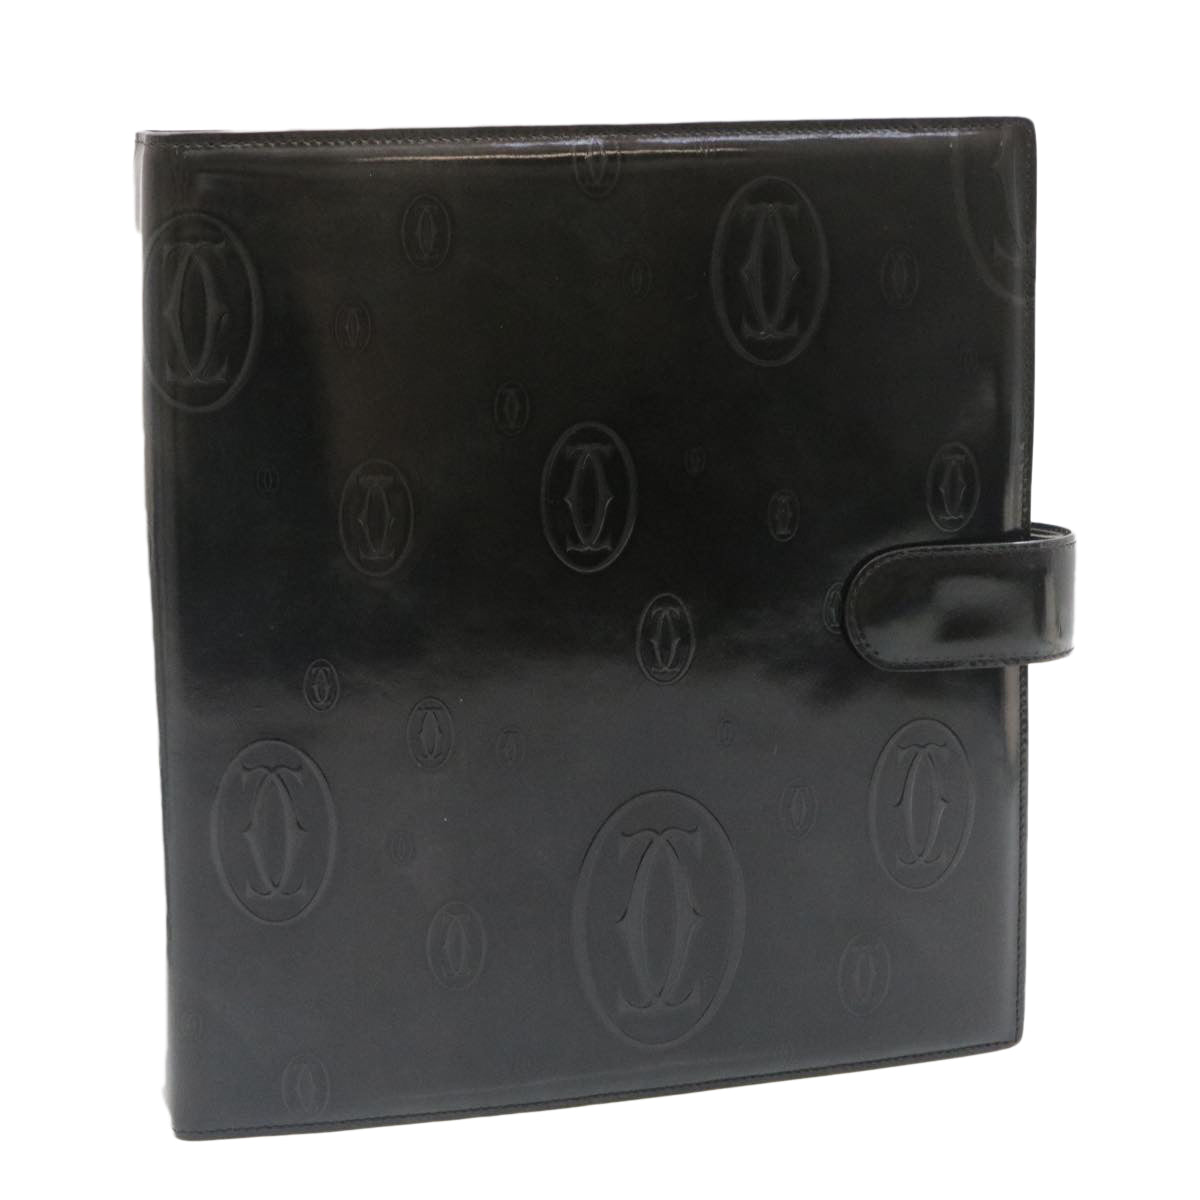 CARTIER Day Planner Cover Enamel Black Auth ar6515